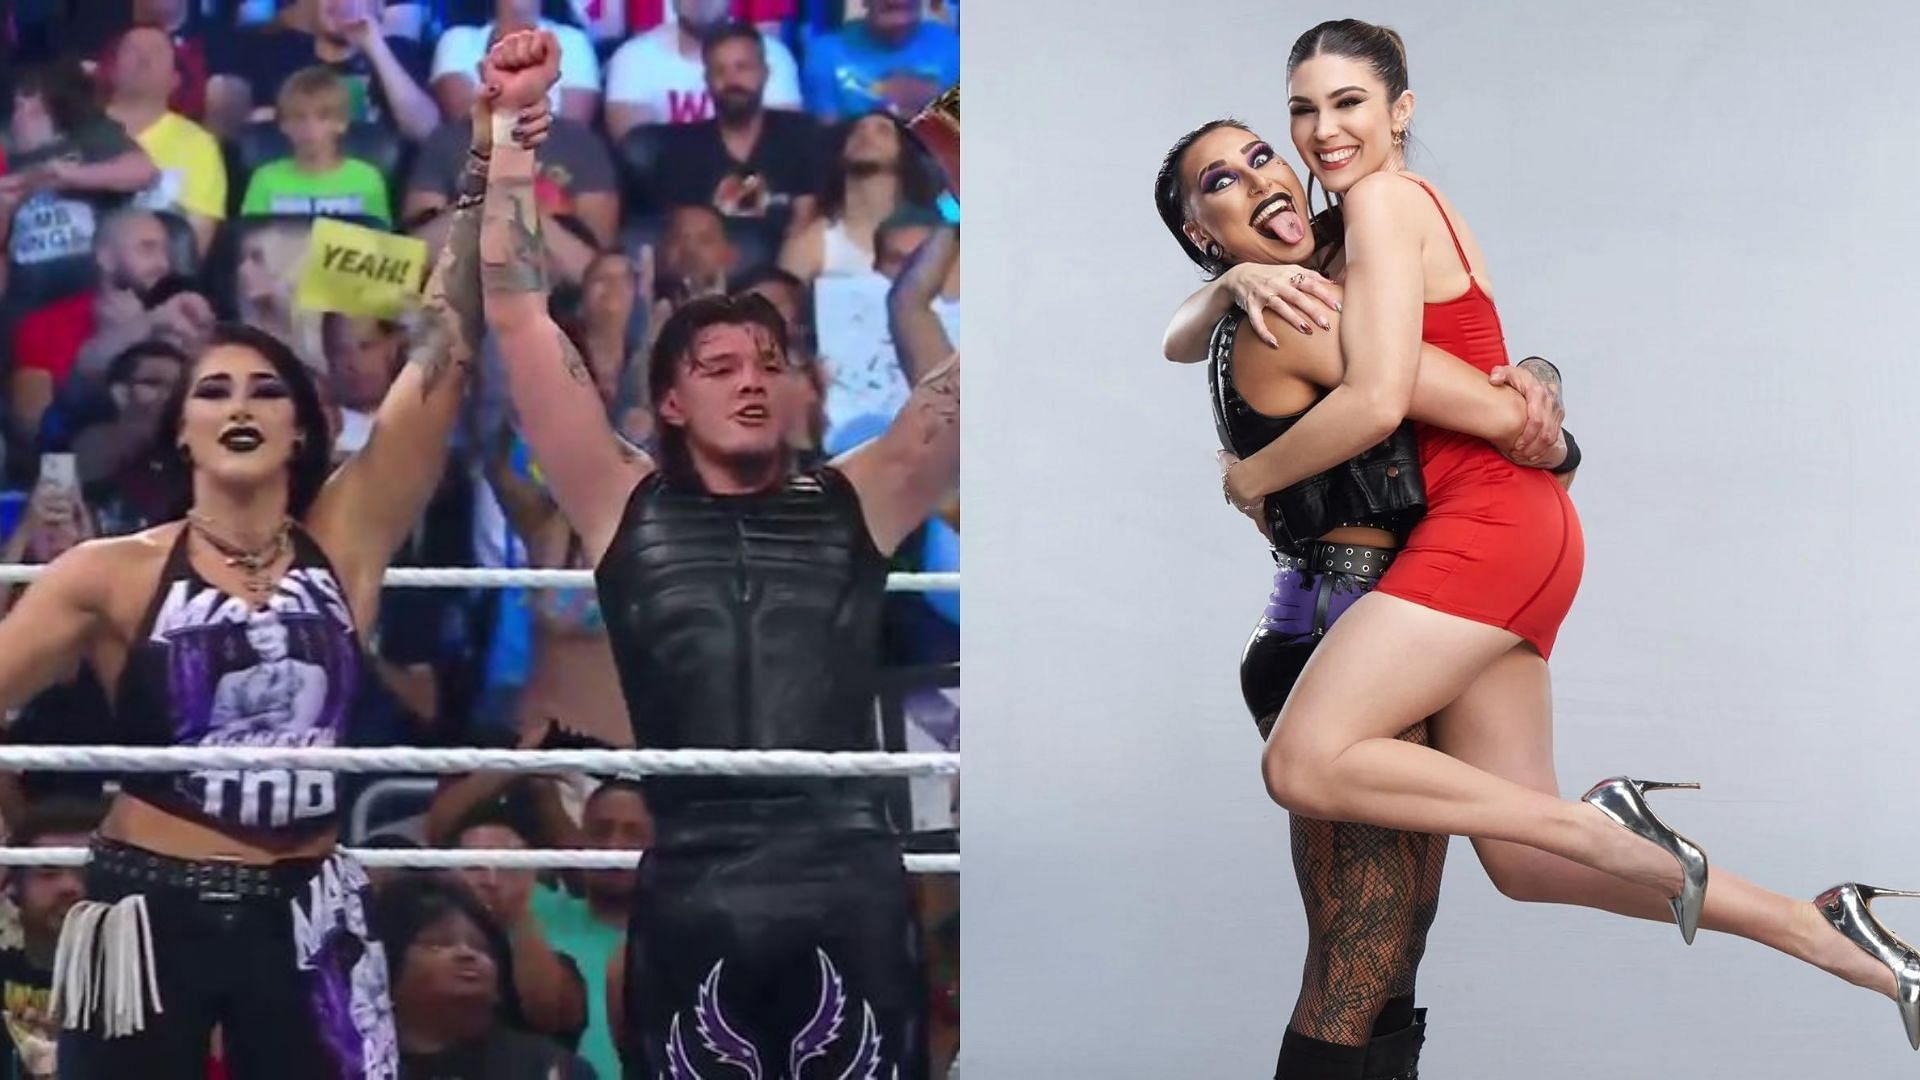 Cathy Kelley recently posted a backstage video featuring two Judgment Day members